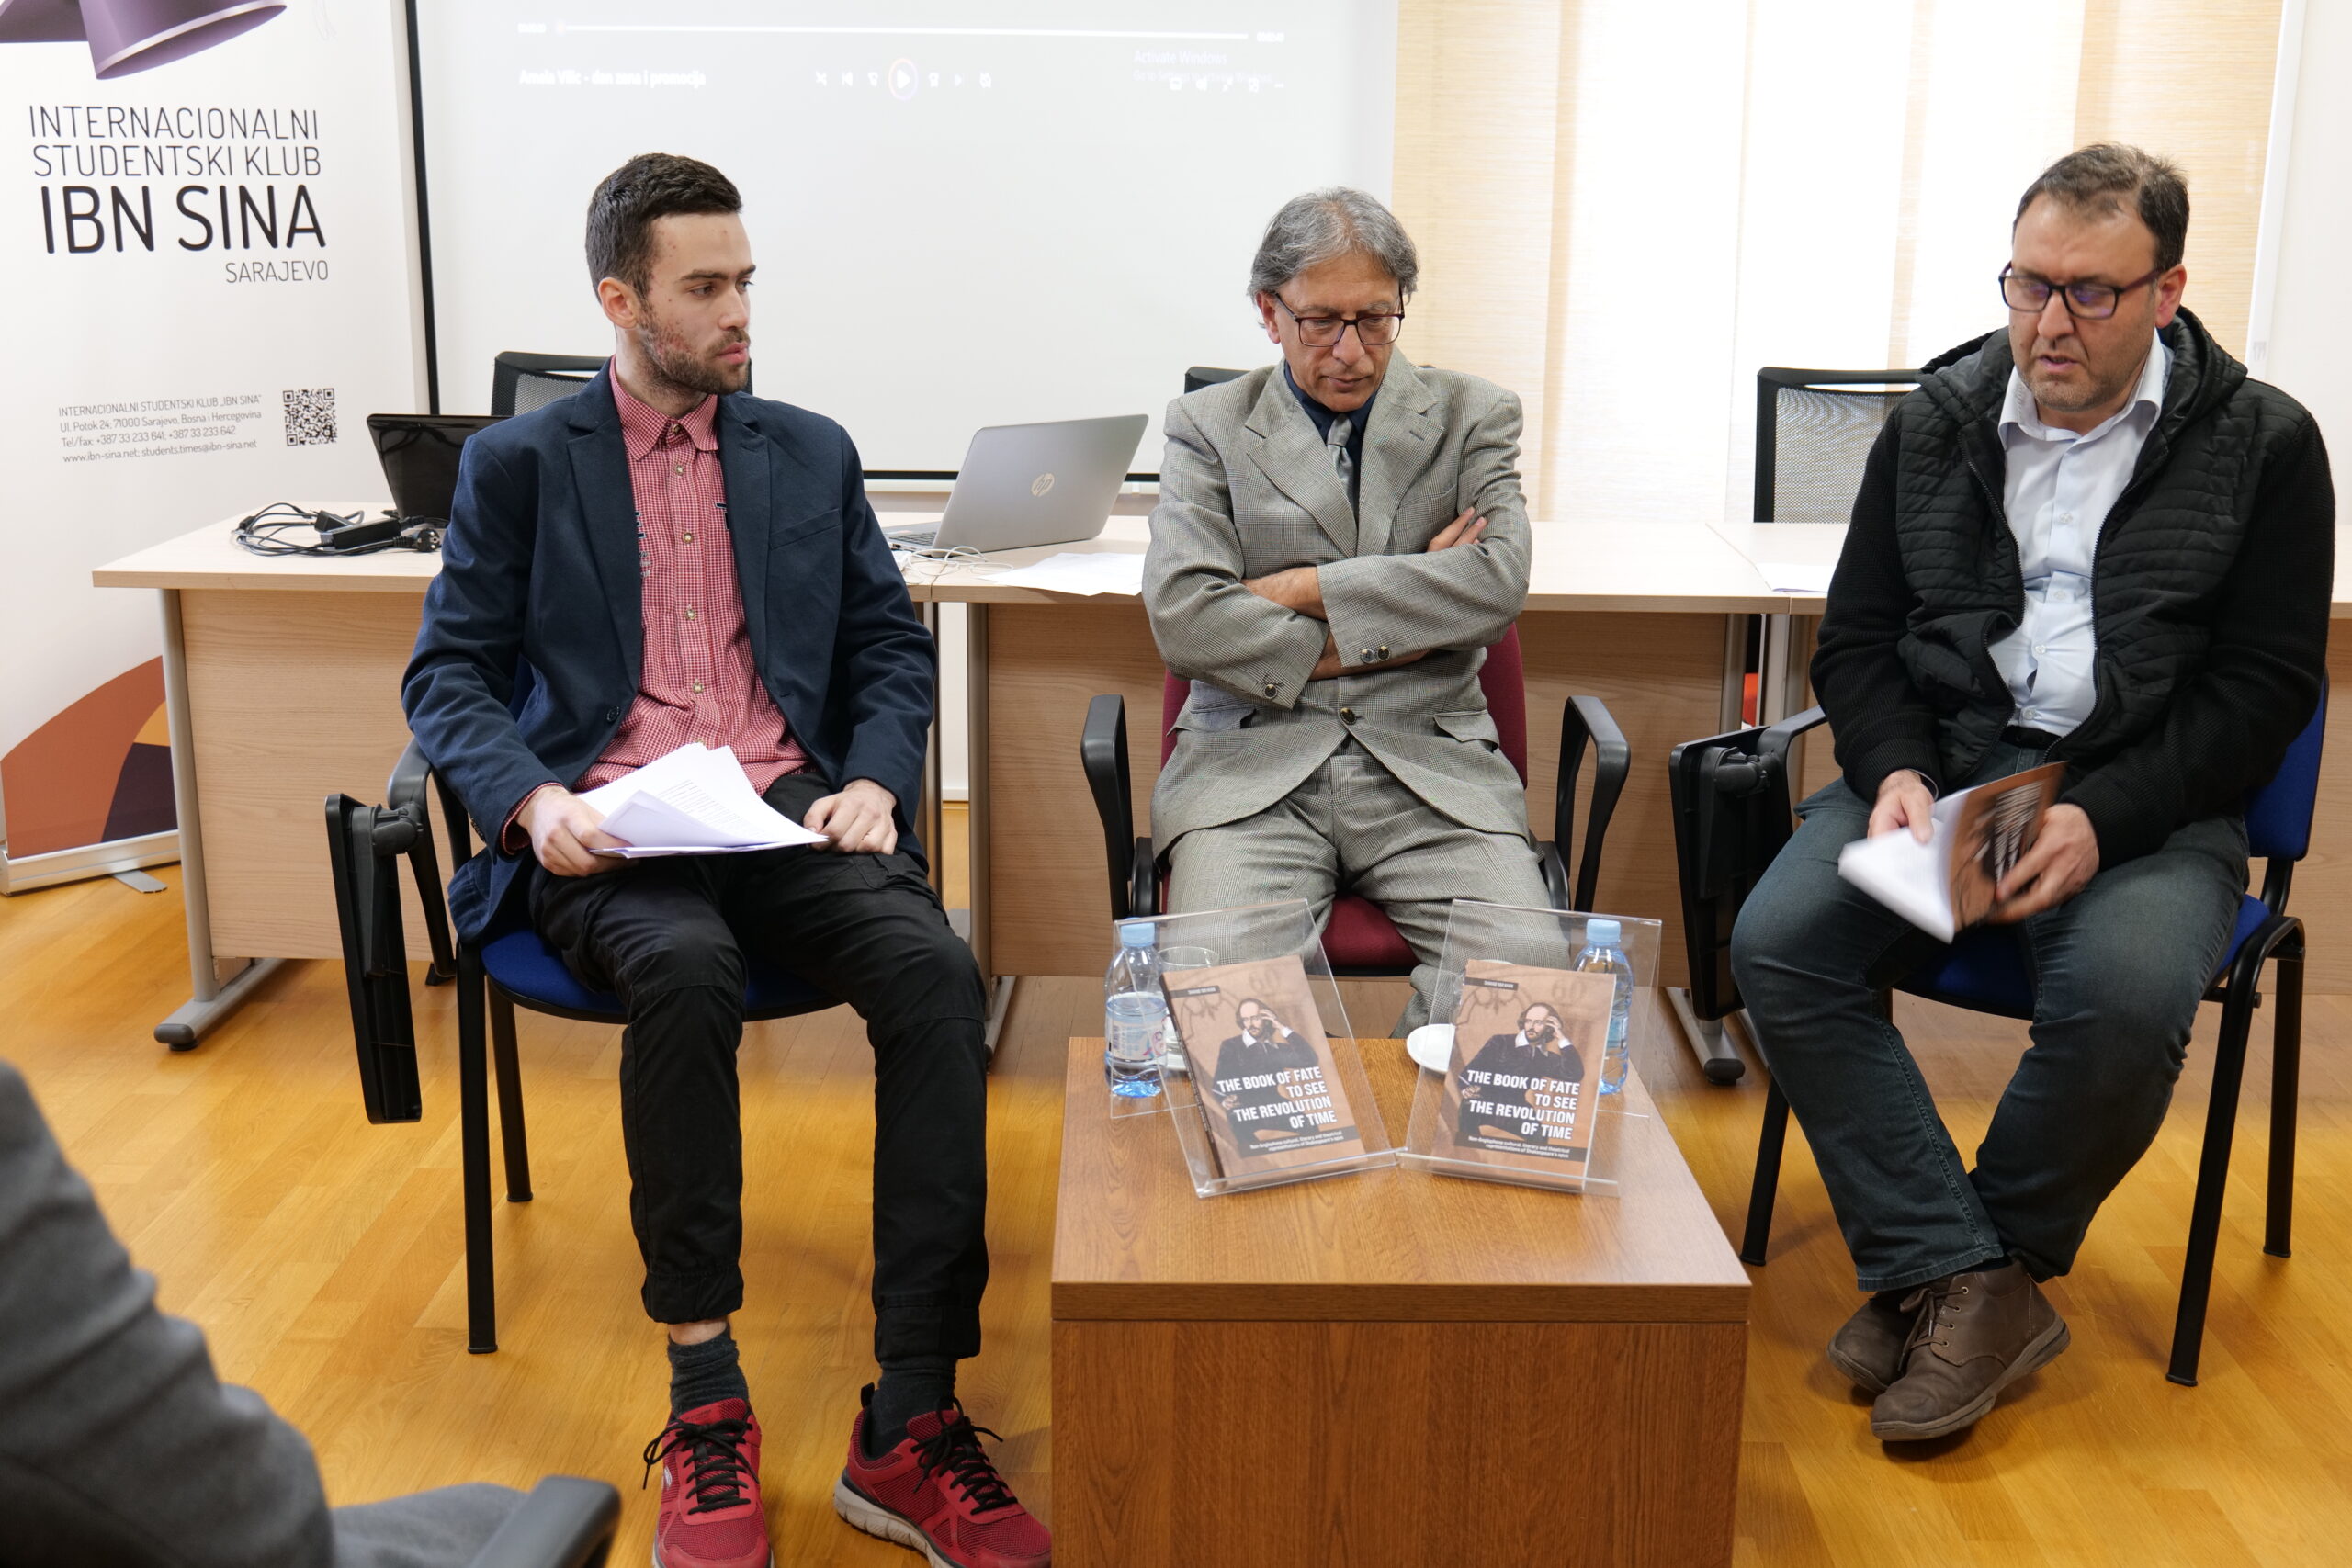 A two-part  program of the International students club „Ibn Sina“ on the occasion of the International Women’s Day was held, including a promotion of „The Book of Fate to See the Revolution of Time/Knjiga sudbine s pogledom na revoluciju vremena“, authored by prof. Shahab Yar Khan PhD